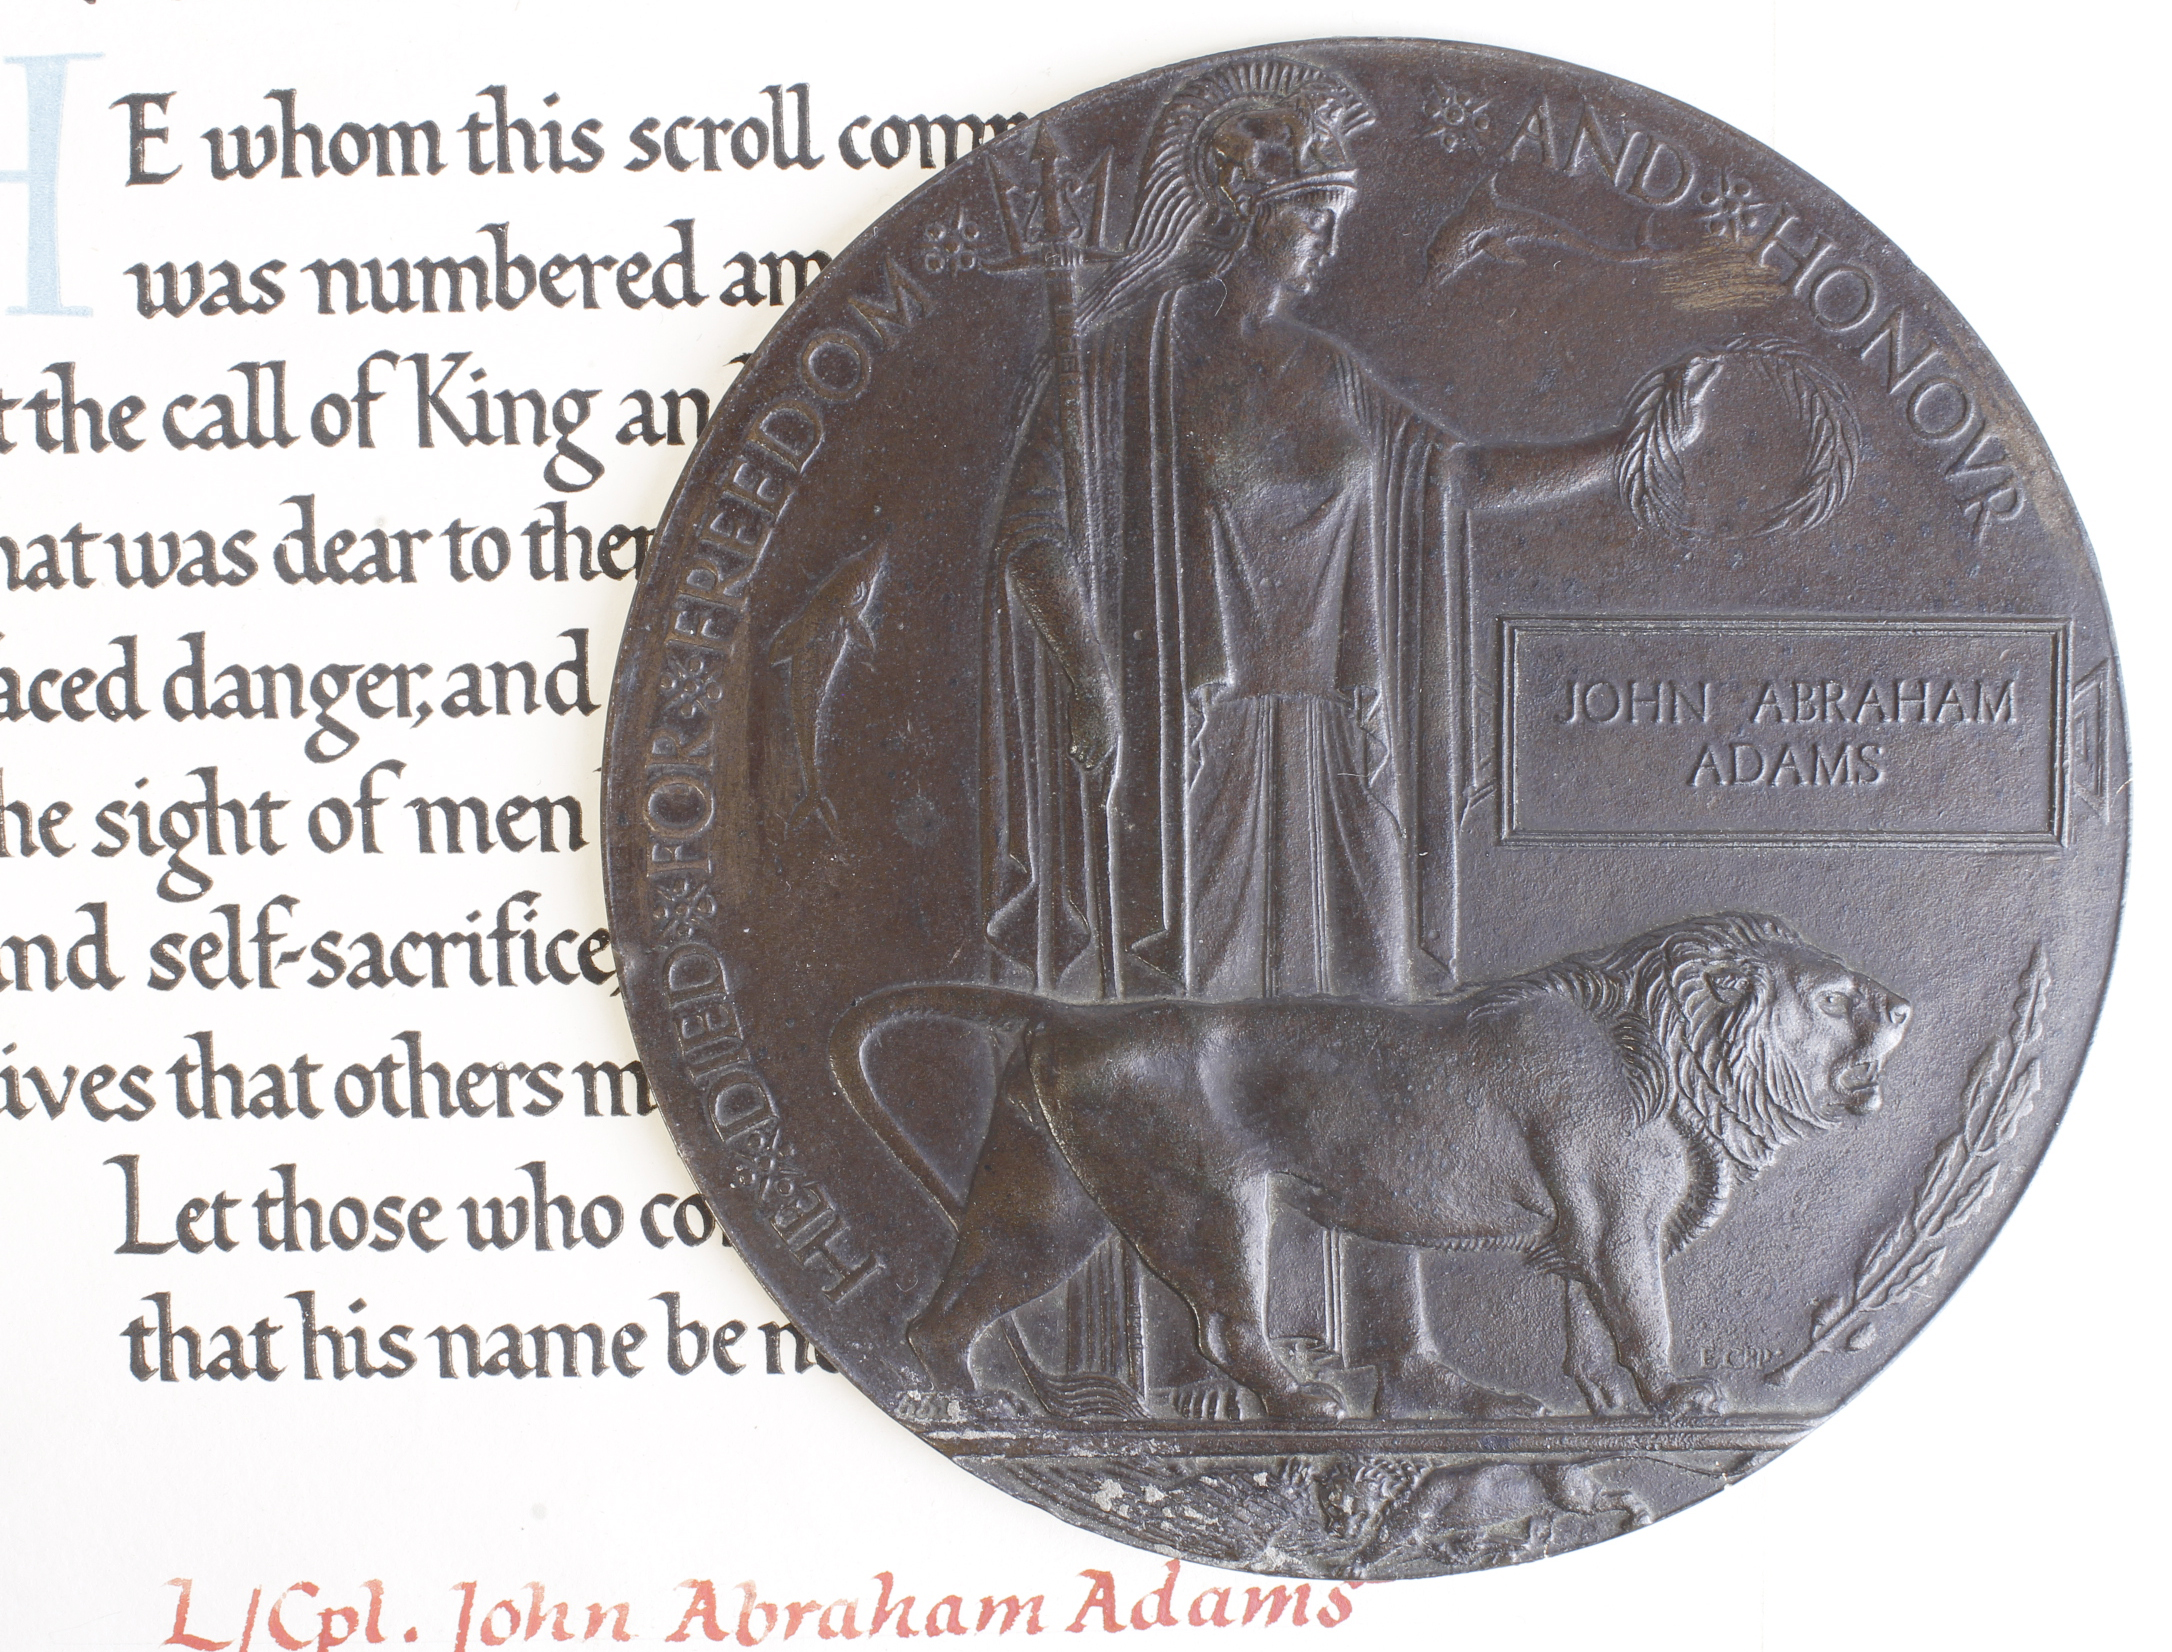 Death Plaque + Scroll to C-3548 Rfn John Abraham Adams 17th Bn KRRC. Killed In Action 31st July